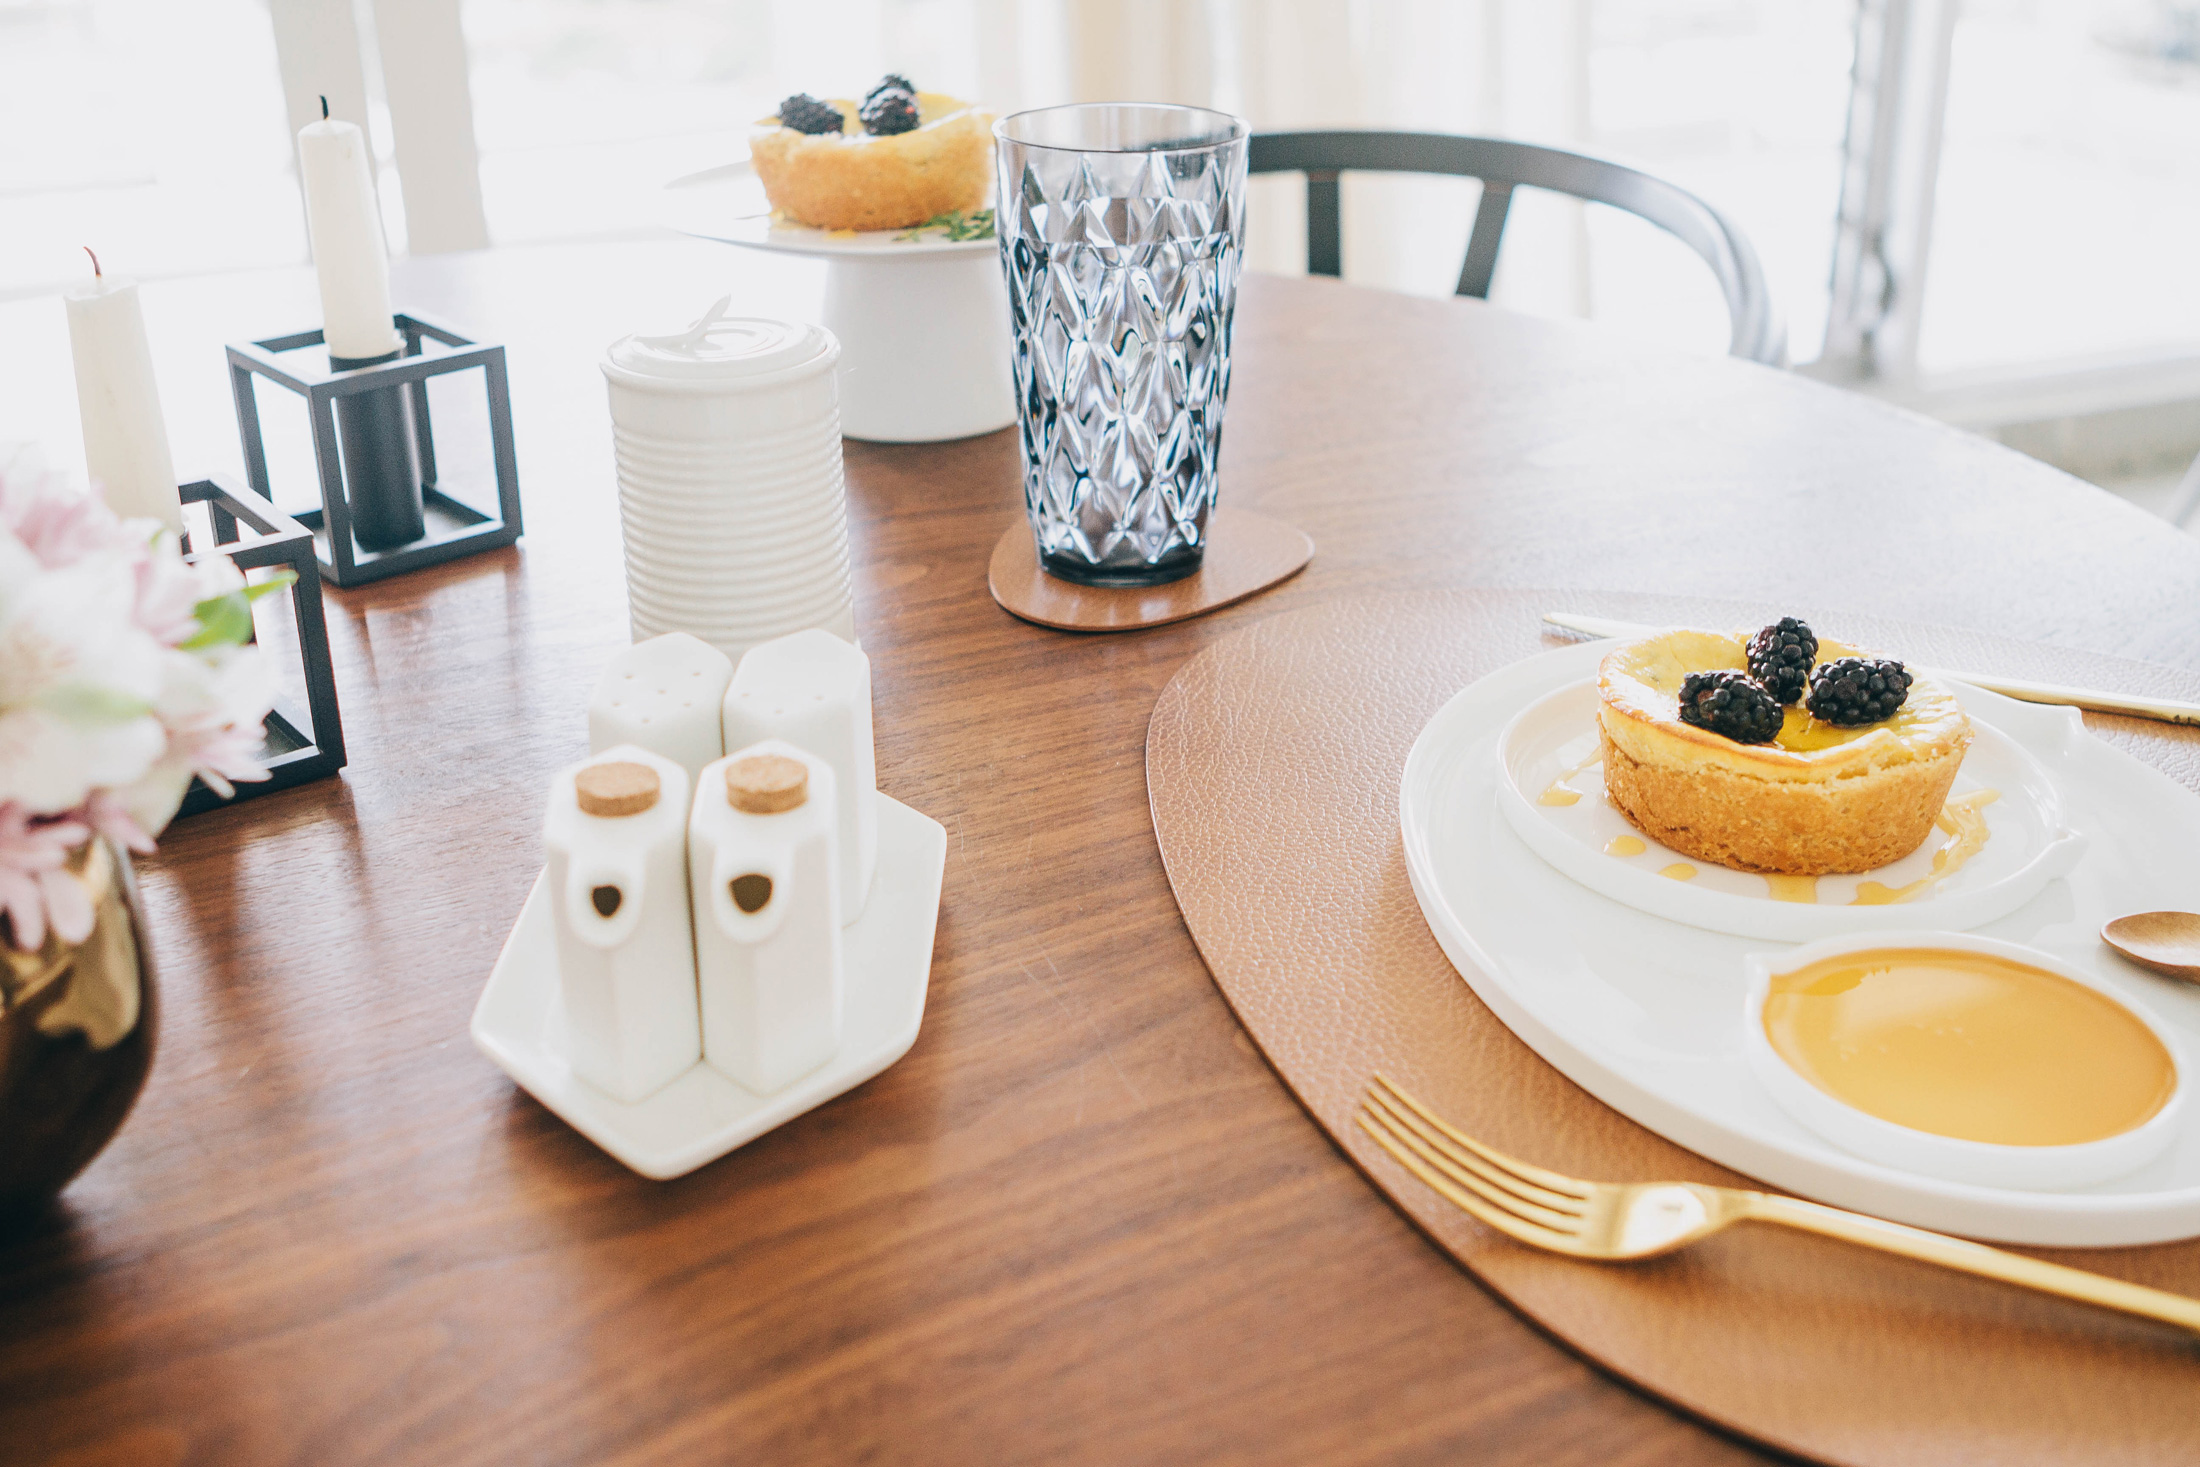 Tablescape with Kubus by Lassen candleholders